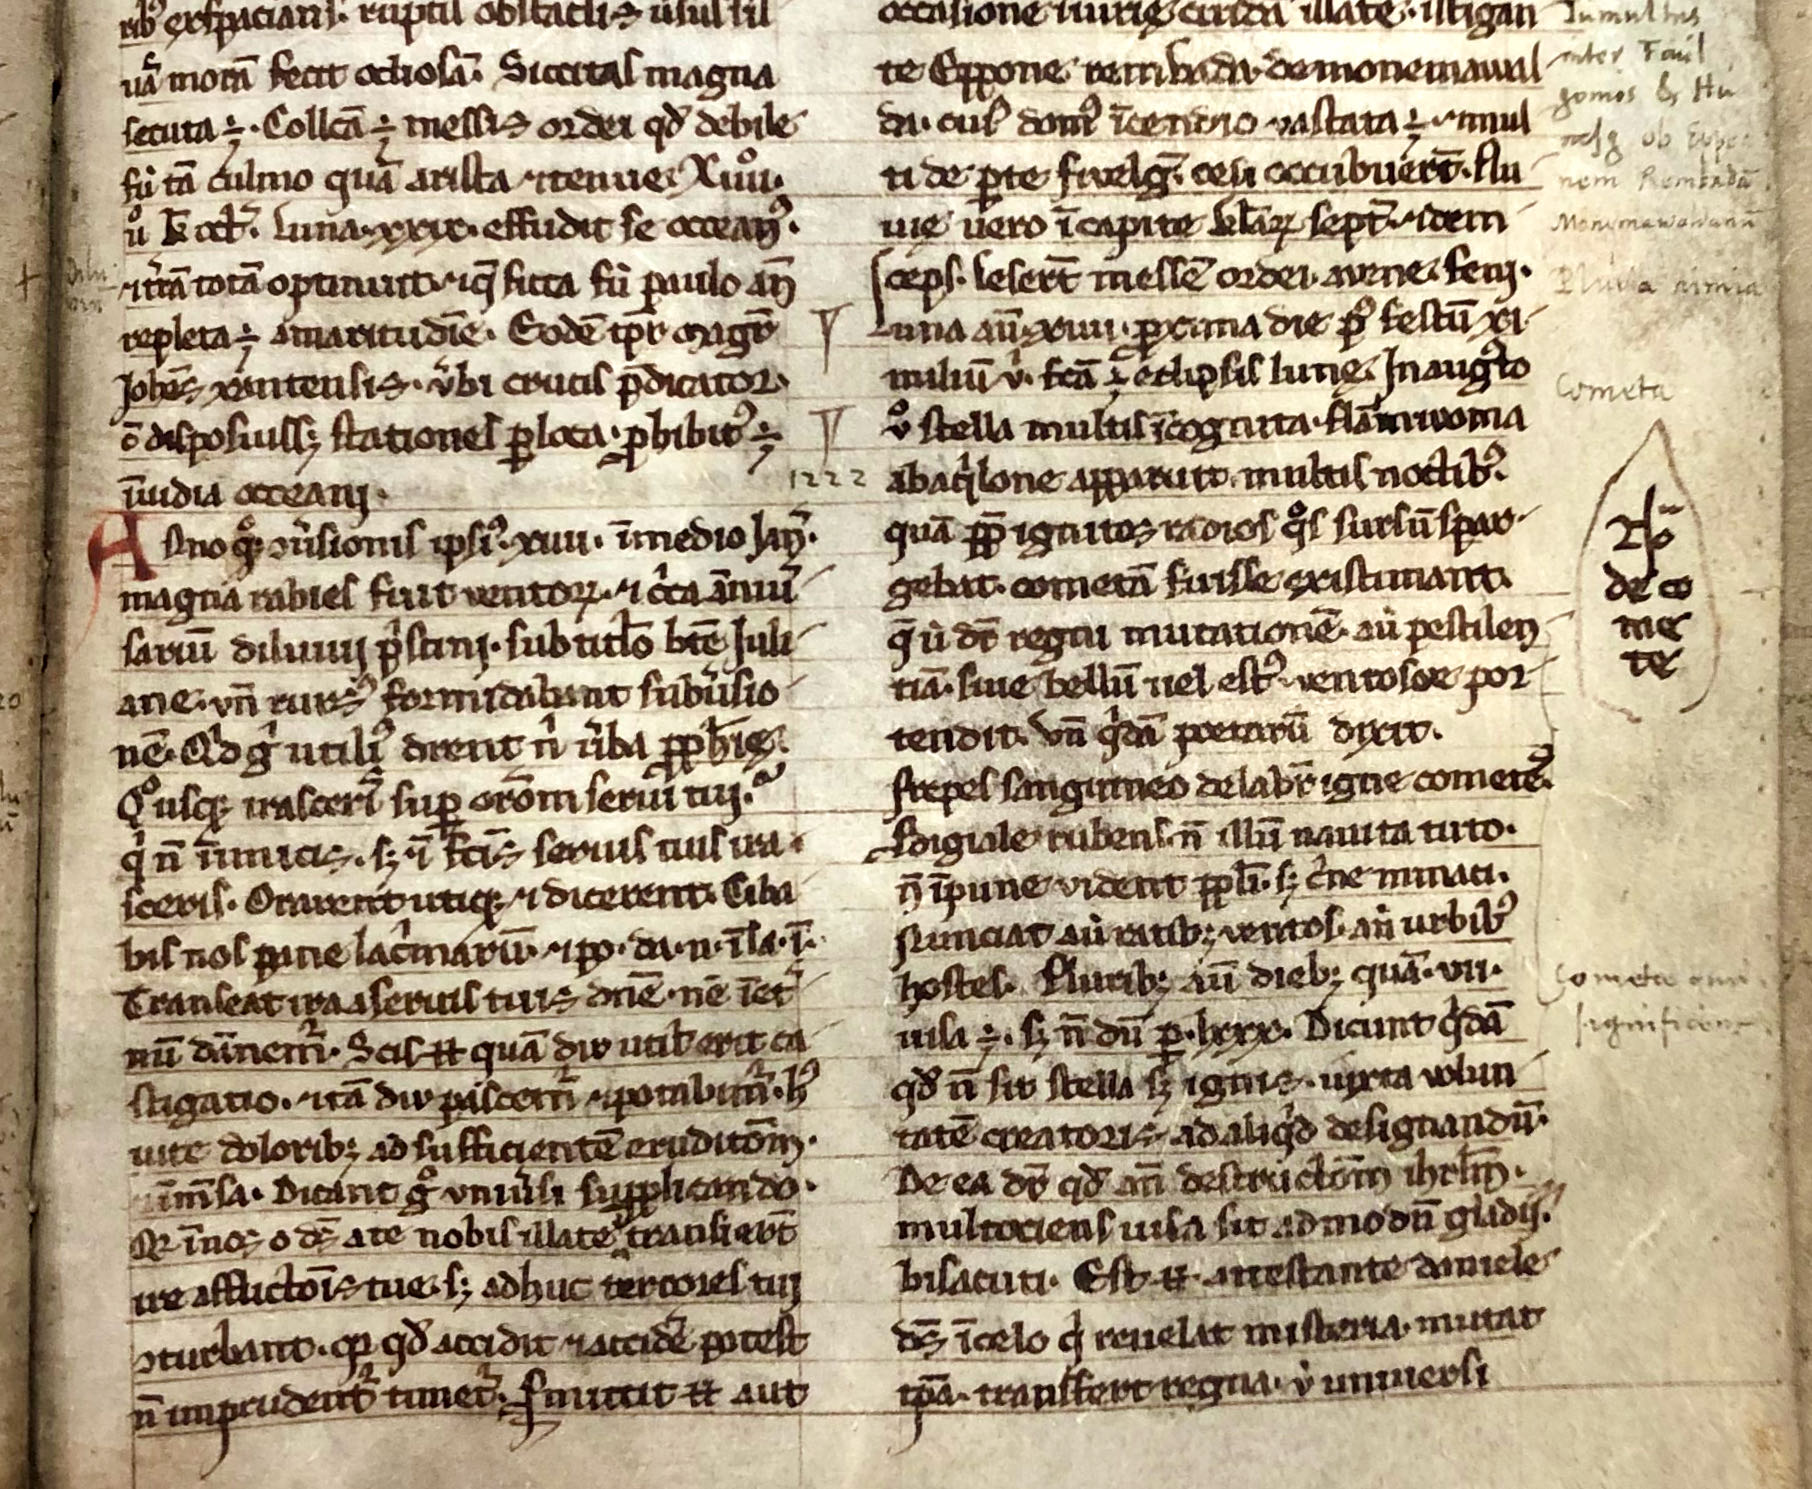 In the entries for the year 1222, Emo writes: “When the moon was 14 days old, on the day after the Feast of the 11,000 Virgins [22 October], there was a lunar eclipse. In August, for many nights, many people saw an unknown flame-throwing star in the North.” Alongside this entry, in the margin, Ubbo Emmius wrote: cometa. UBG HS 116, fol. 16r, col. 62